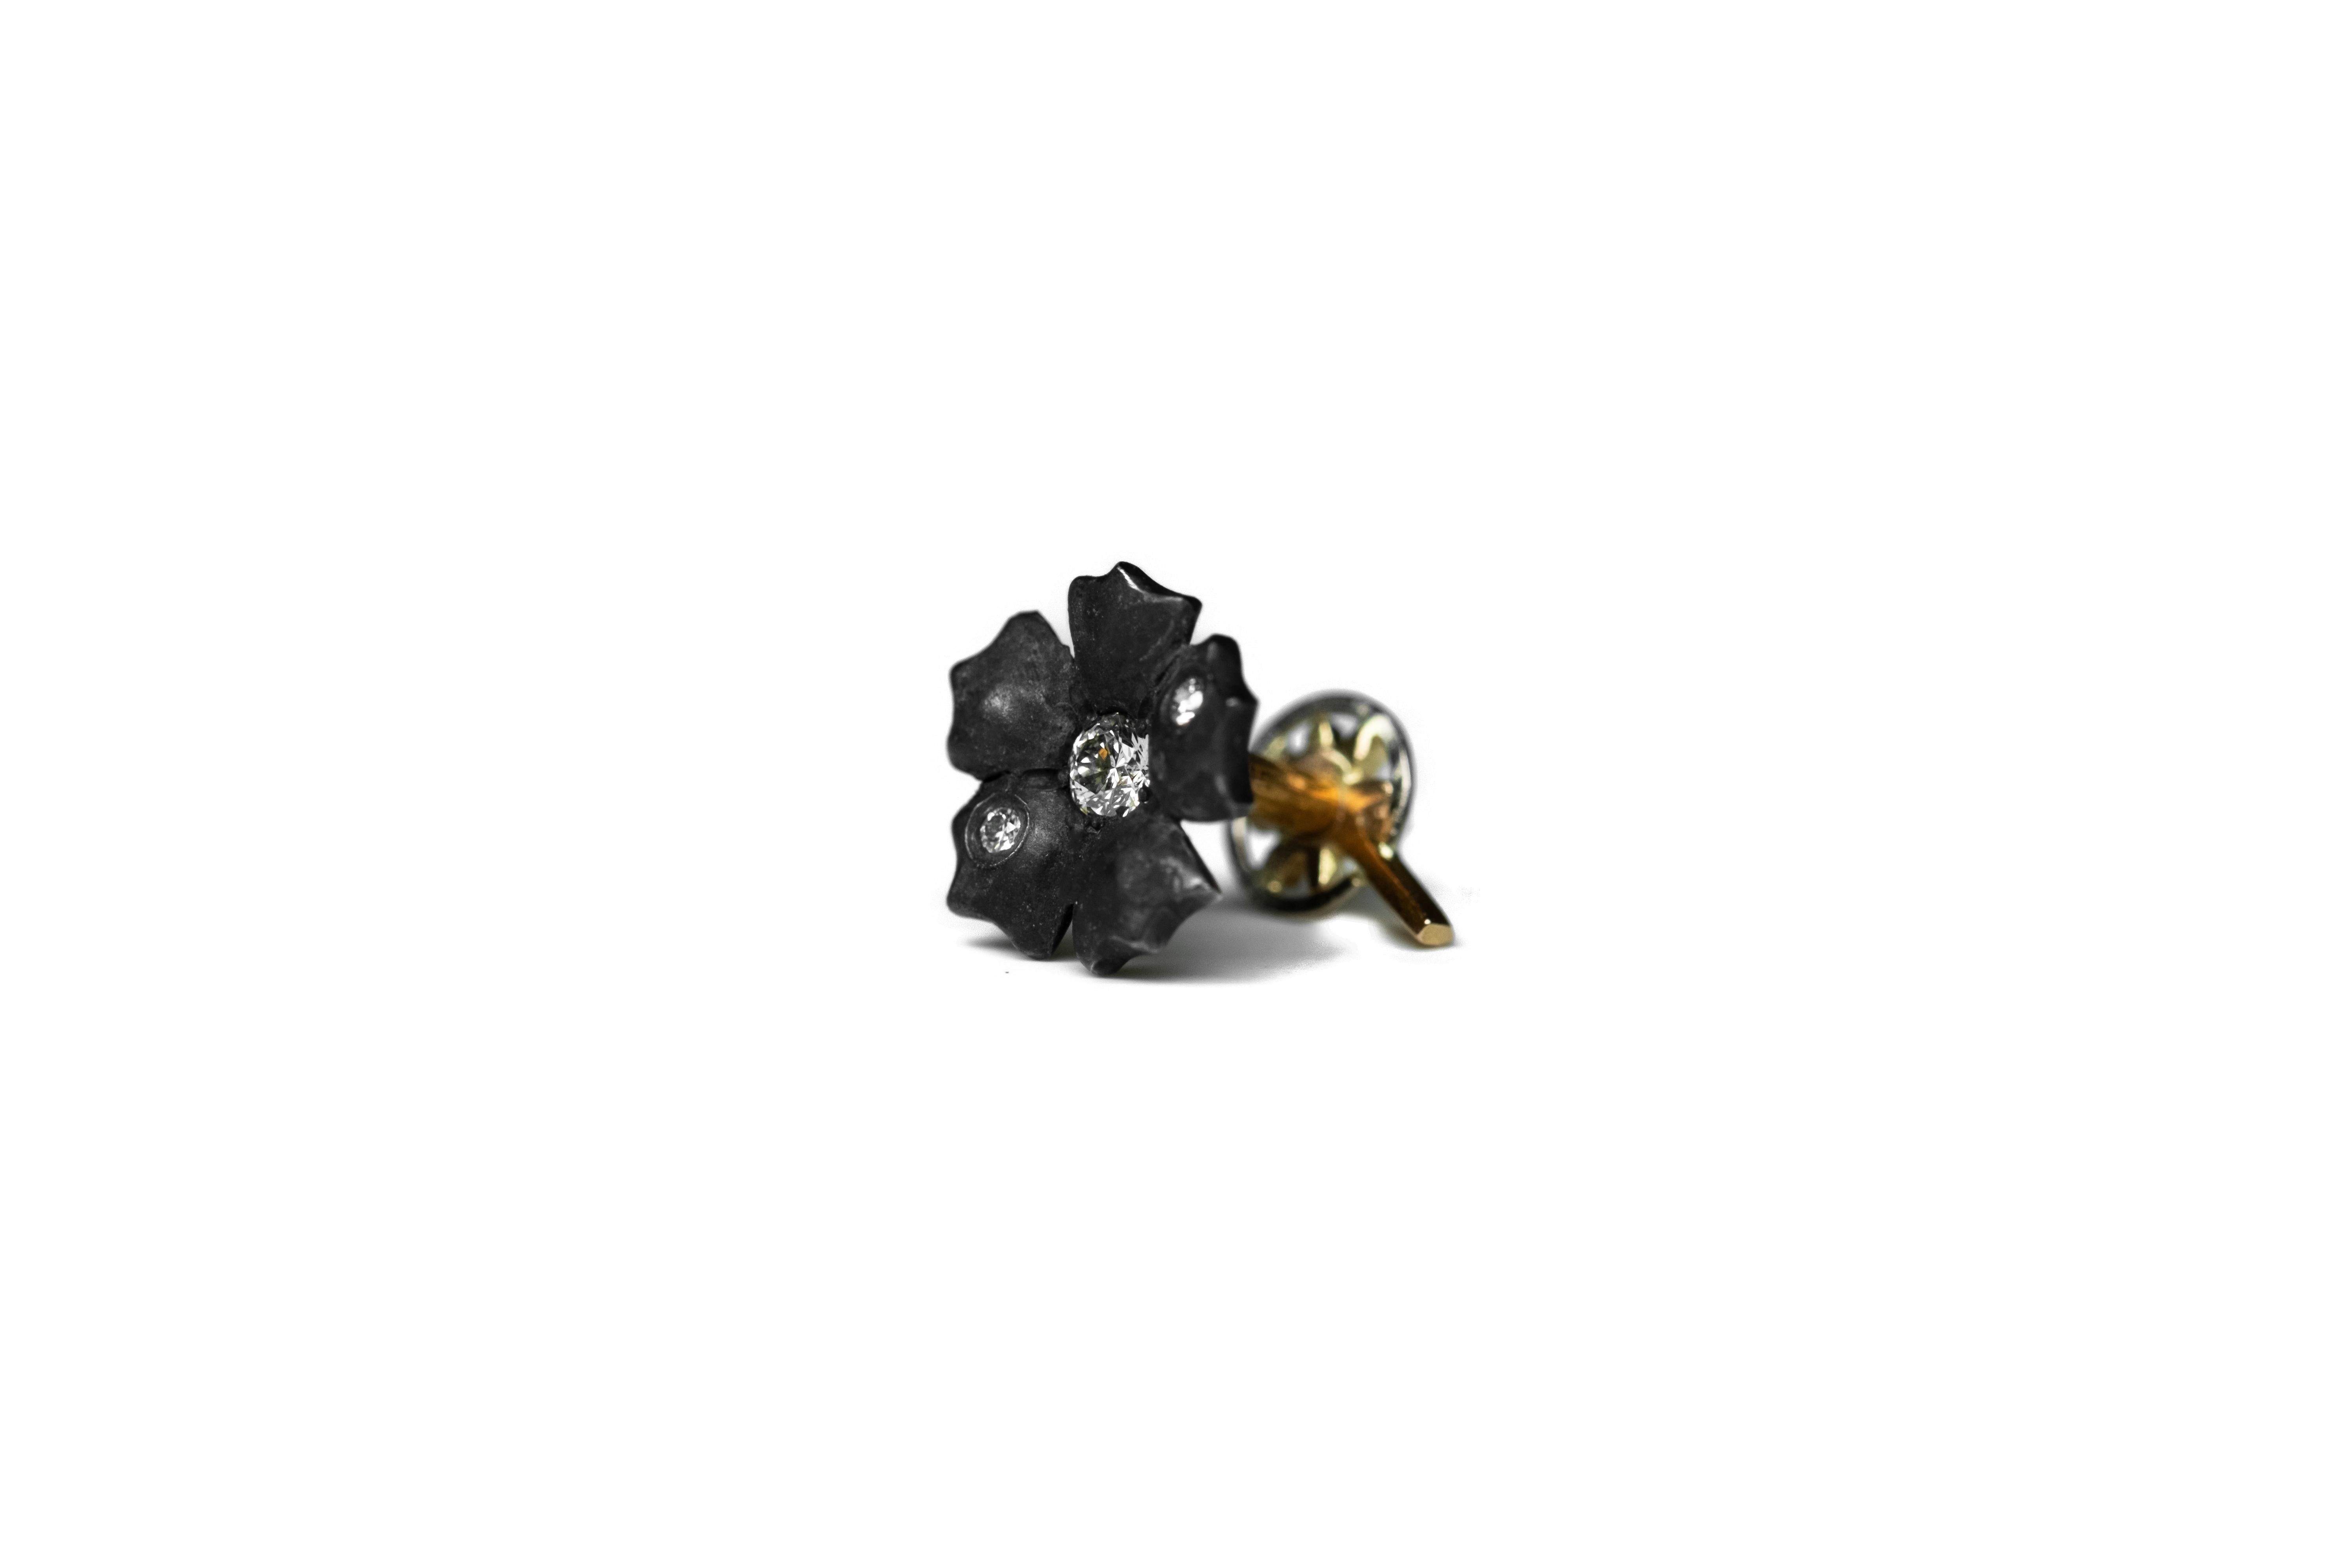 Flower-shaped ear piercing, completely handmade from 18K Fairmined yellow gold, oxidised Fairmined silver, and Canadamark diamonds.

The flower screws into the star at the back. The screw is handmade. We suggest closing it gently and being careful